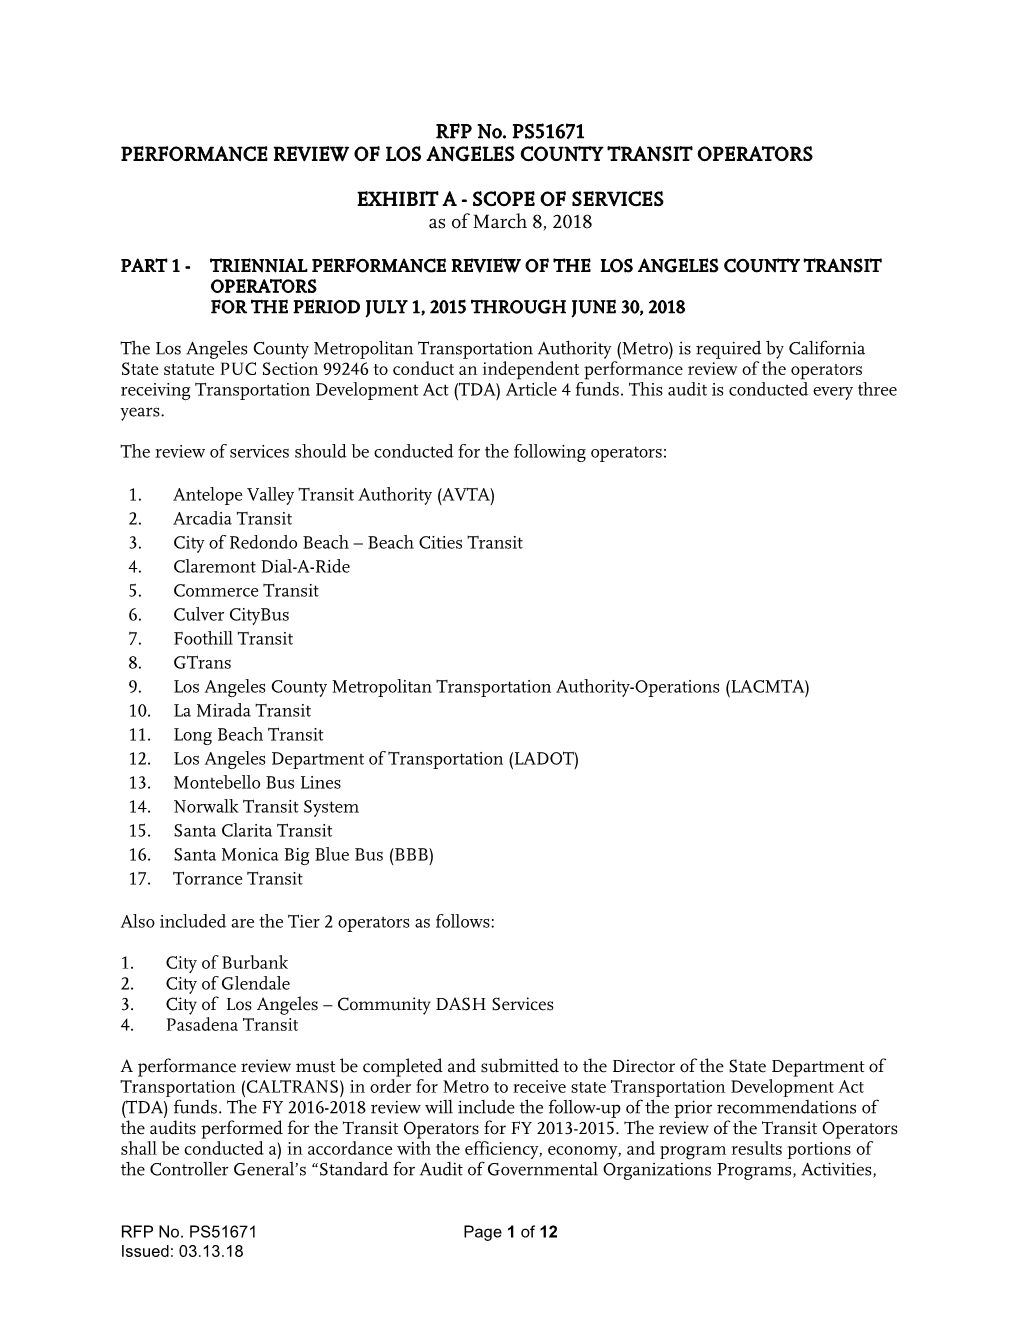 RFP No. PS51671 PERFORMANCE REVIEW of LOS ANGELES COUNTY TRANSIT OPERATORS